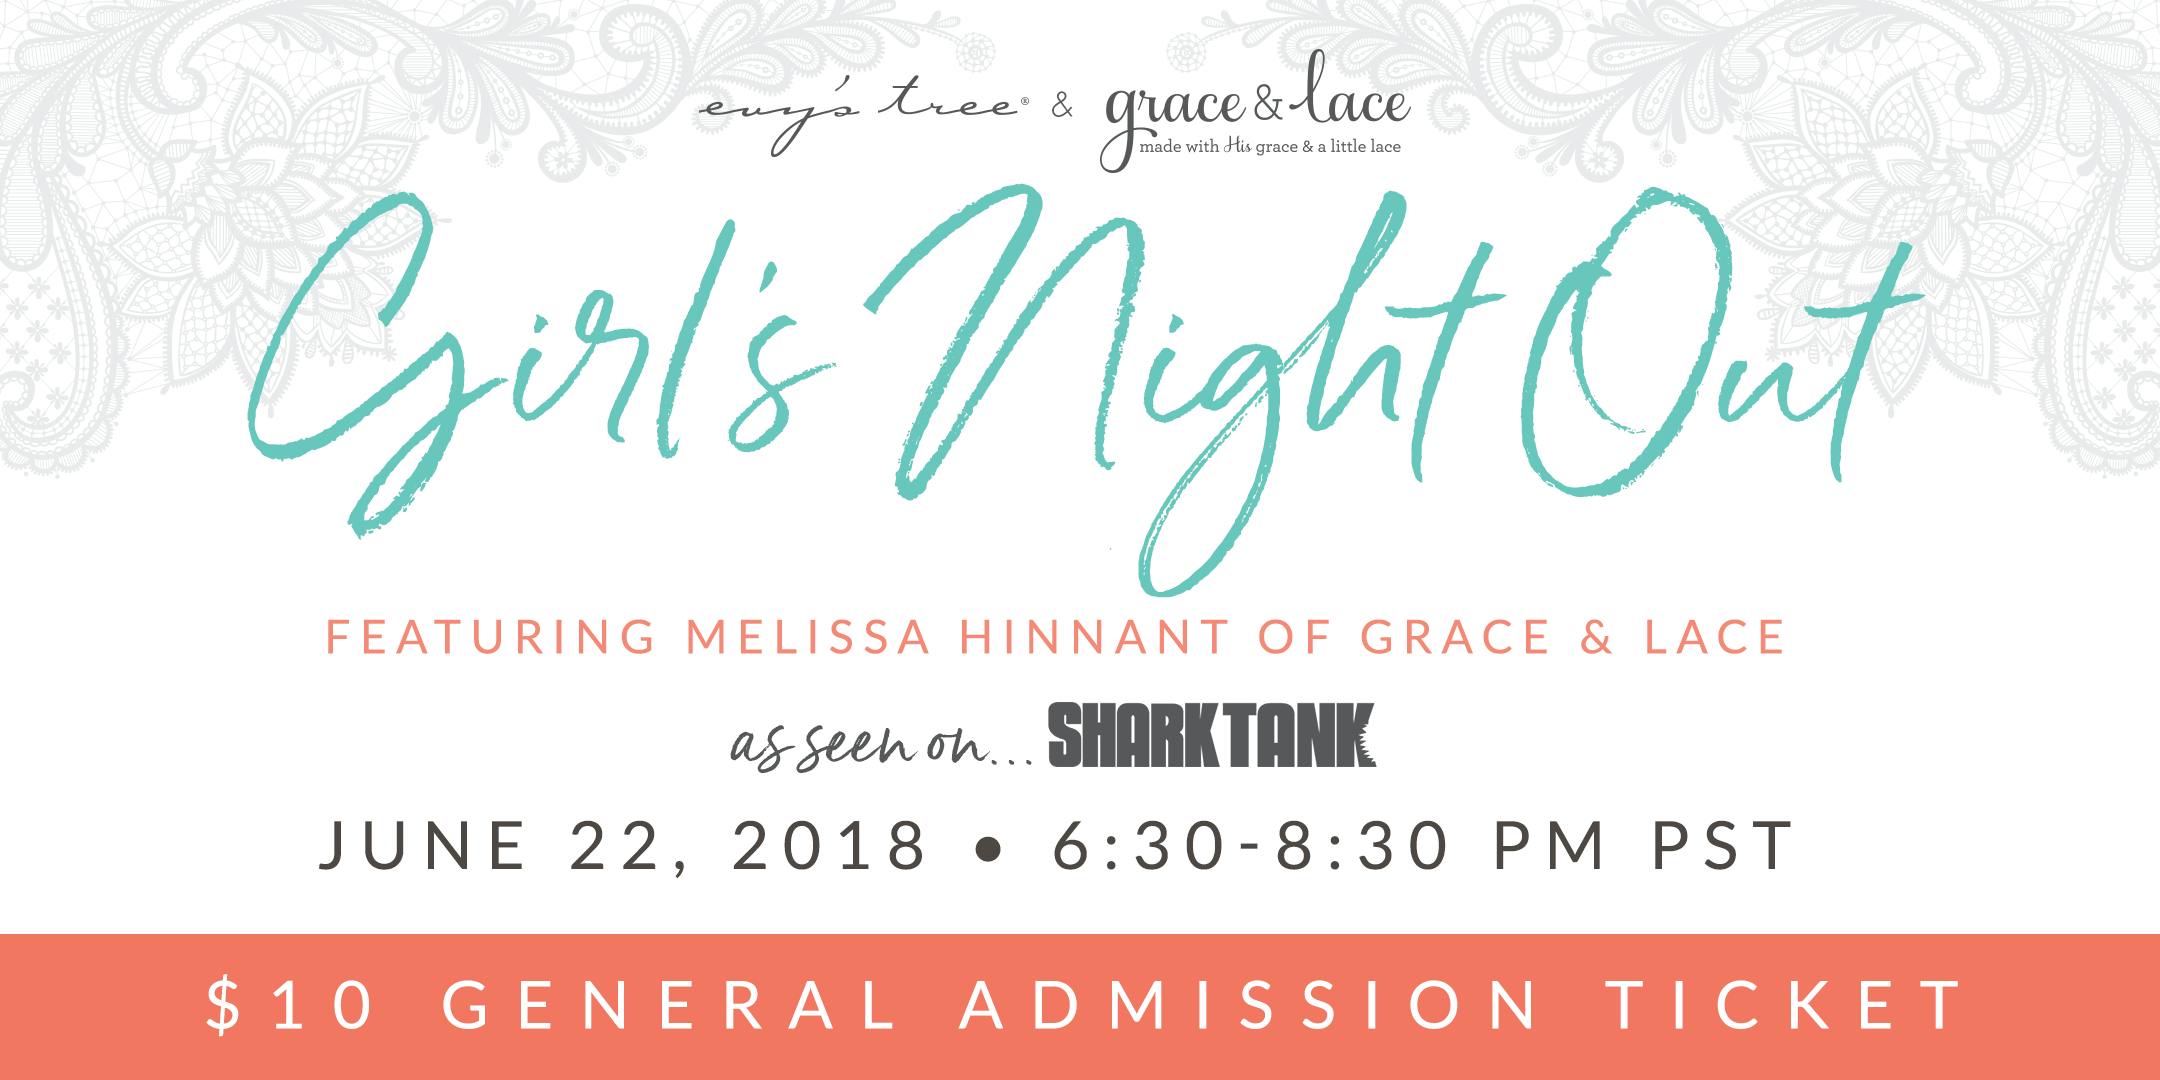 Evy's Tree Girl's Night Out Featuring Melissa Hinnant Grace & Lace